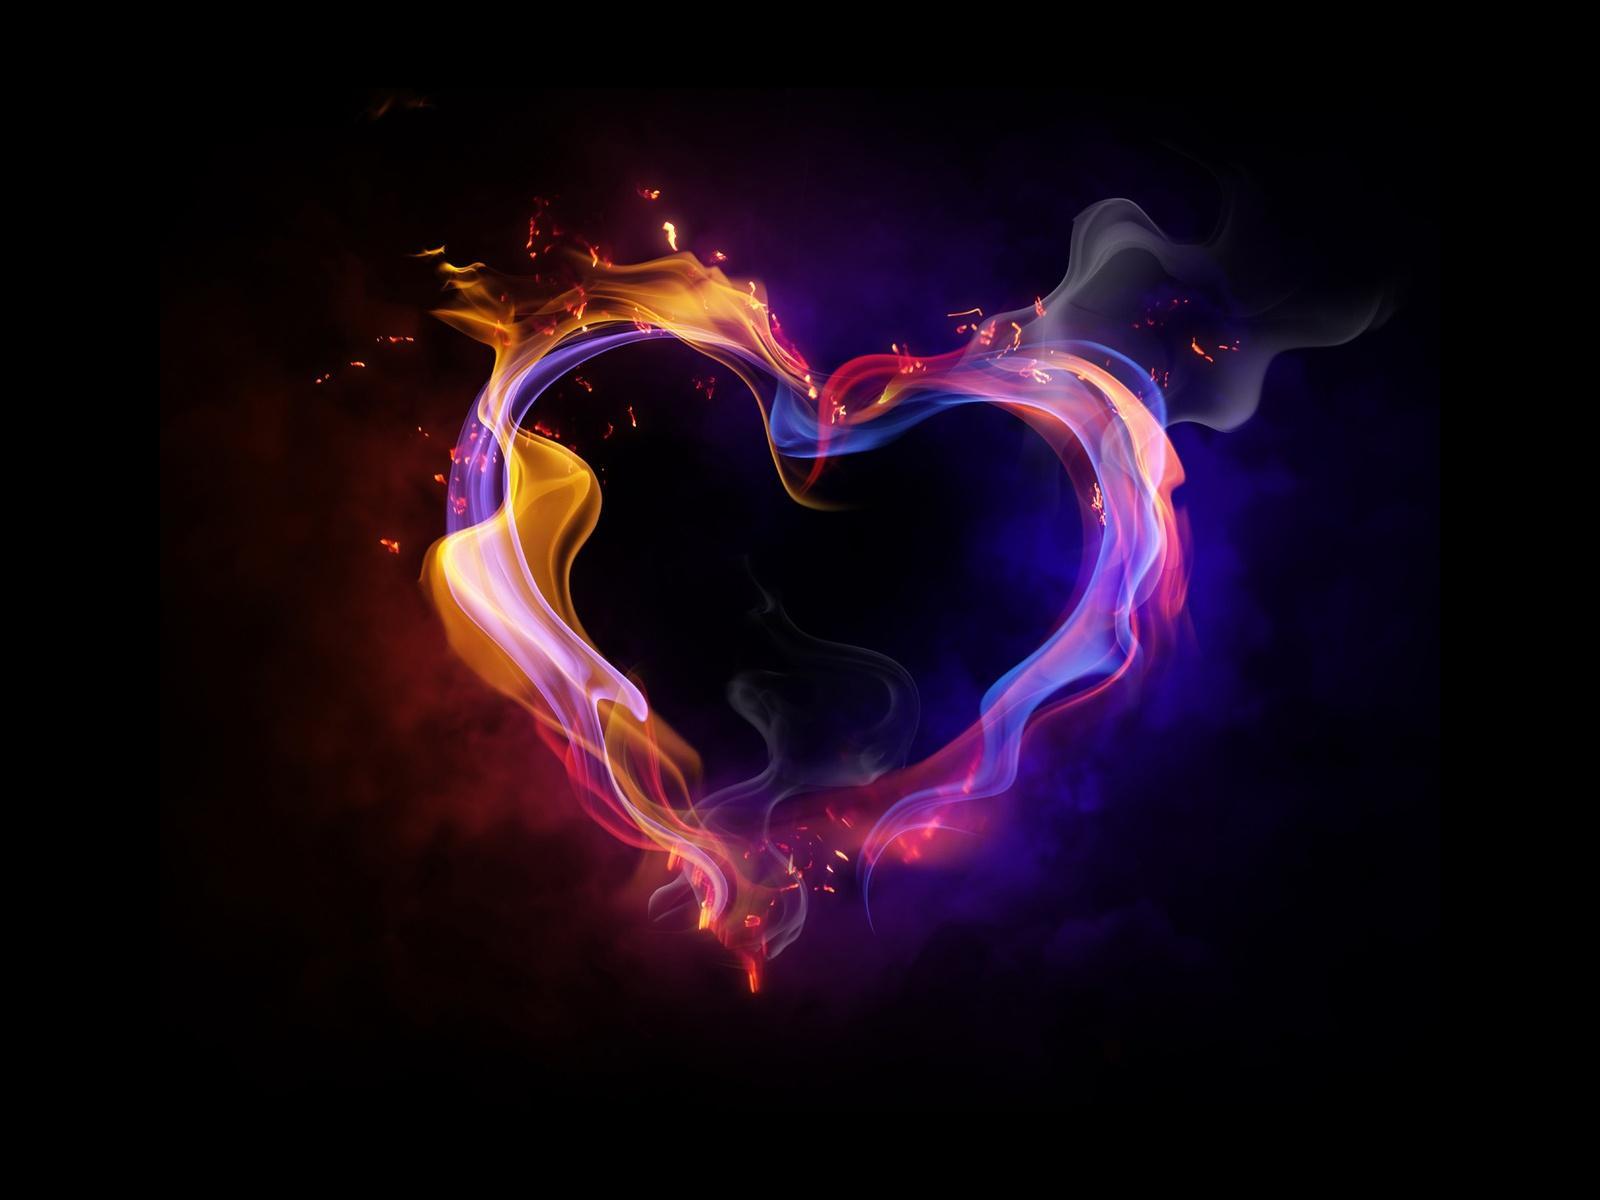 i love ♥ you heart HD wallpaper ♥ You image. Quotes